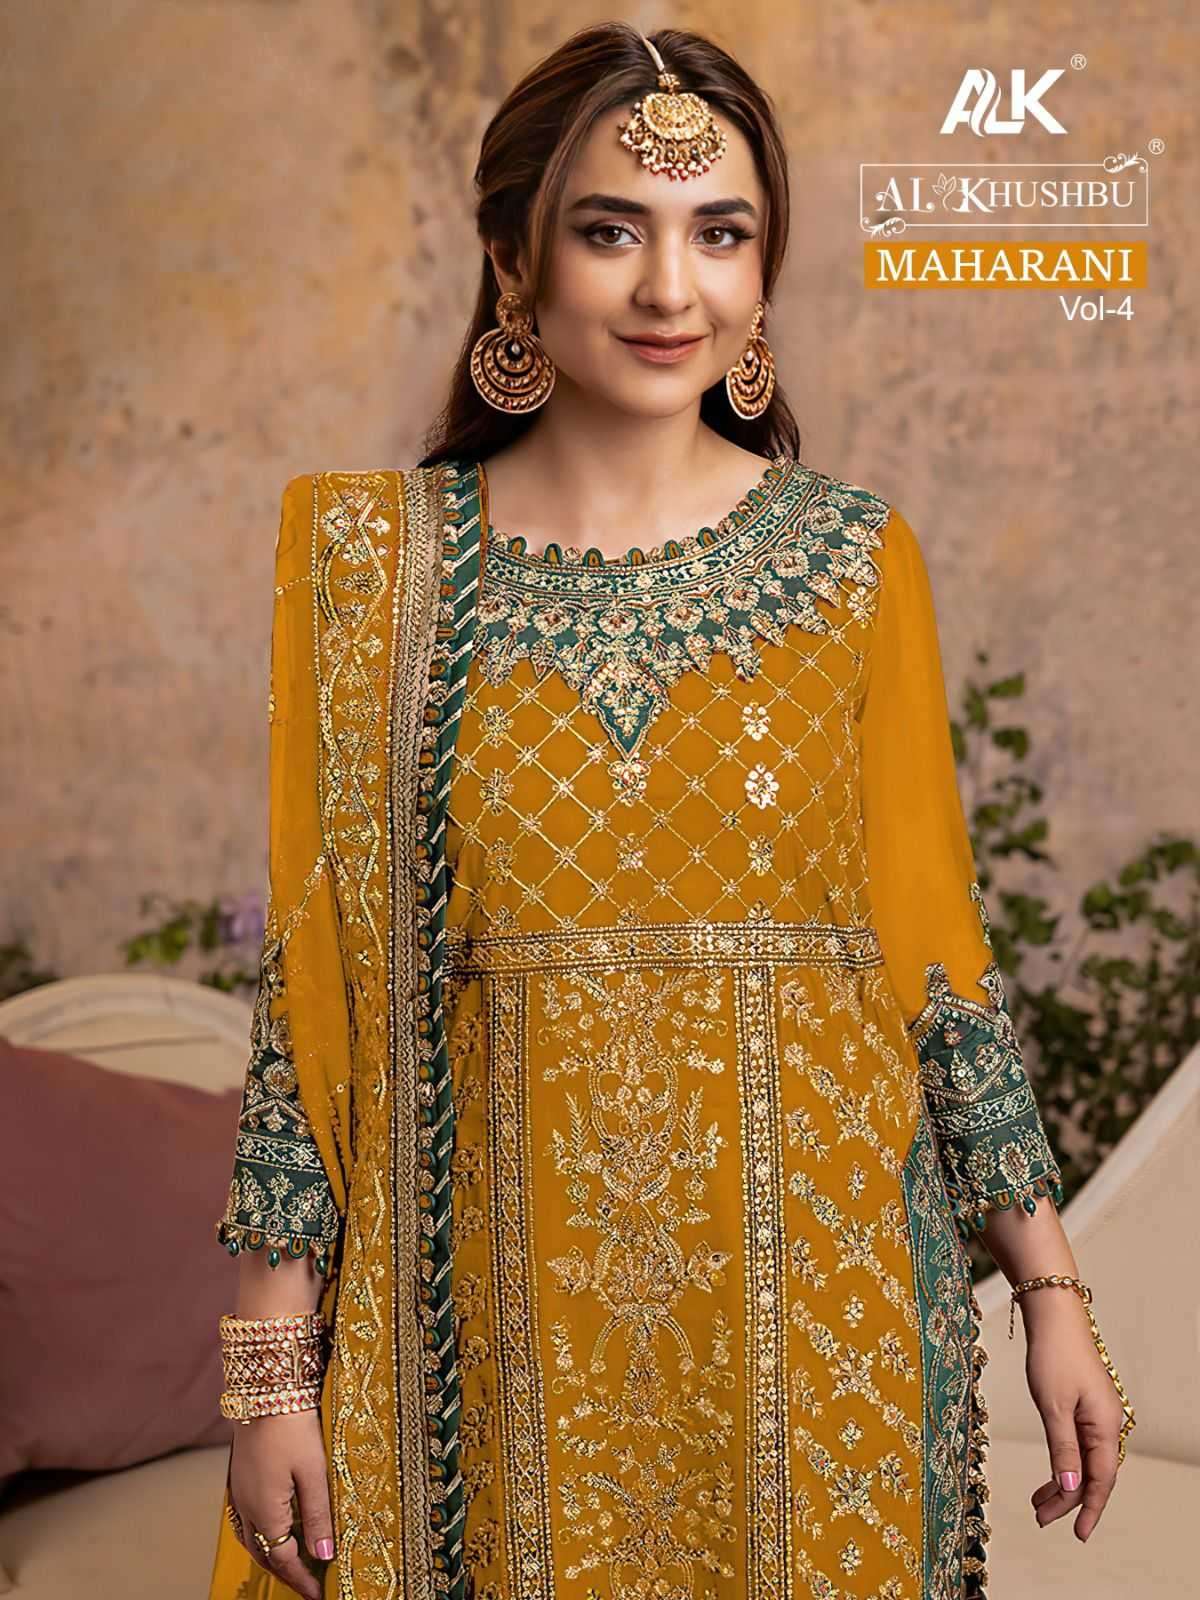 al khushbu maharani vol 4 5082 abcd georgette embroidered suit 